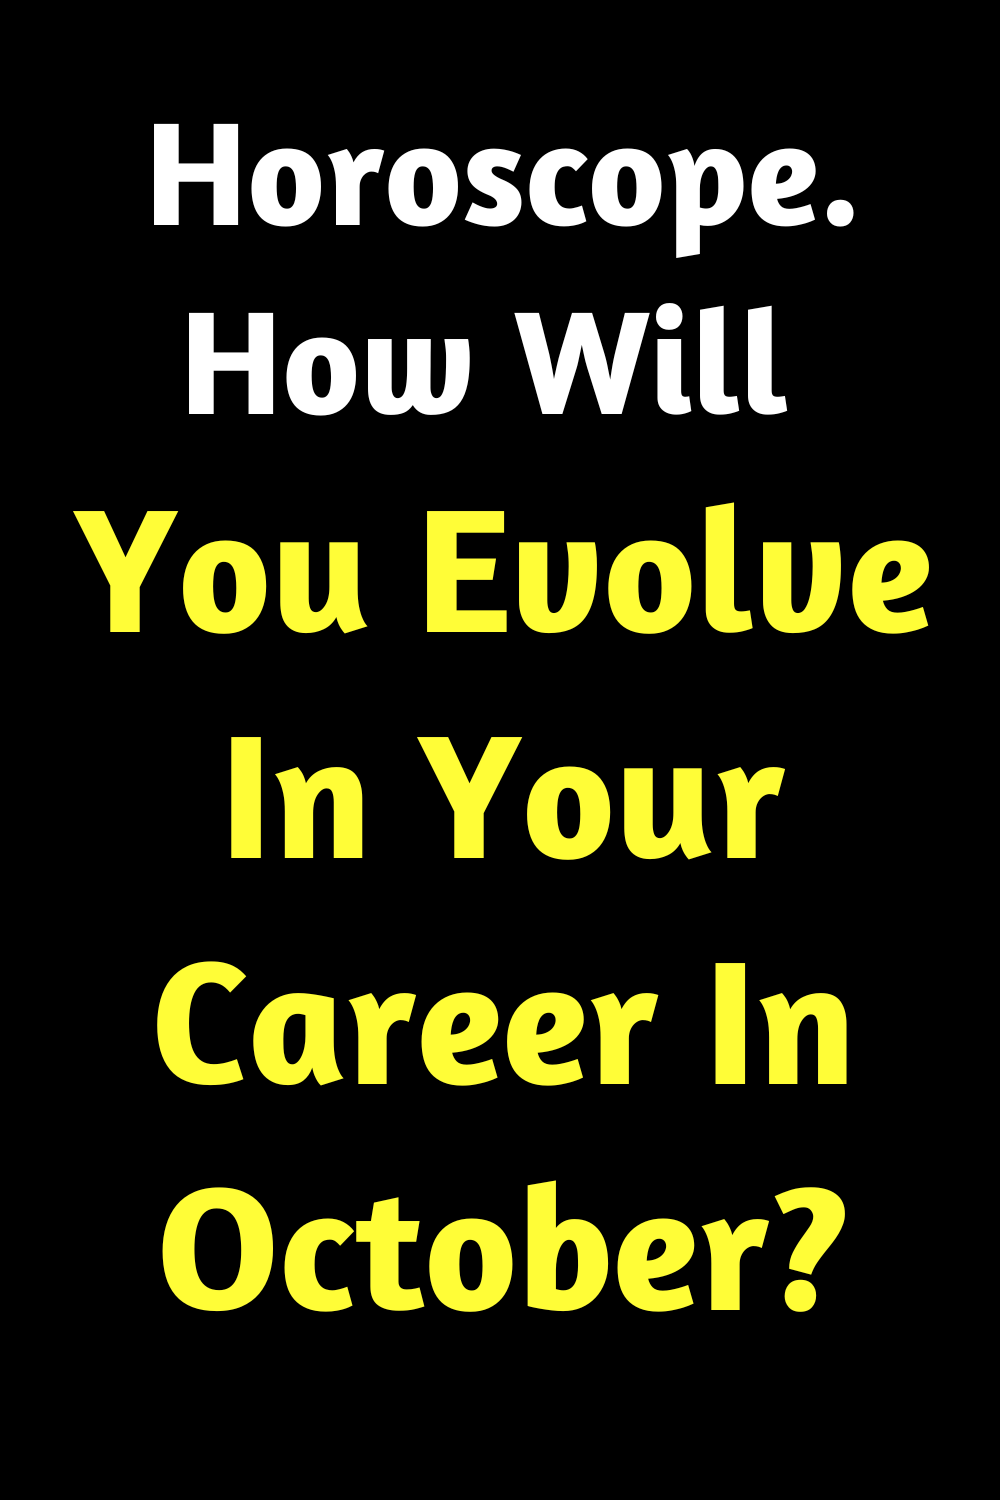 Horoscope. How Will You Evolve In Your Career In October?